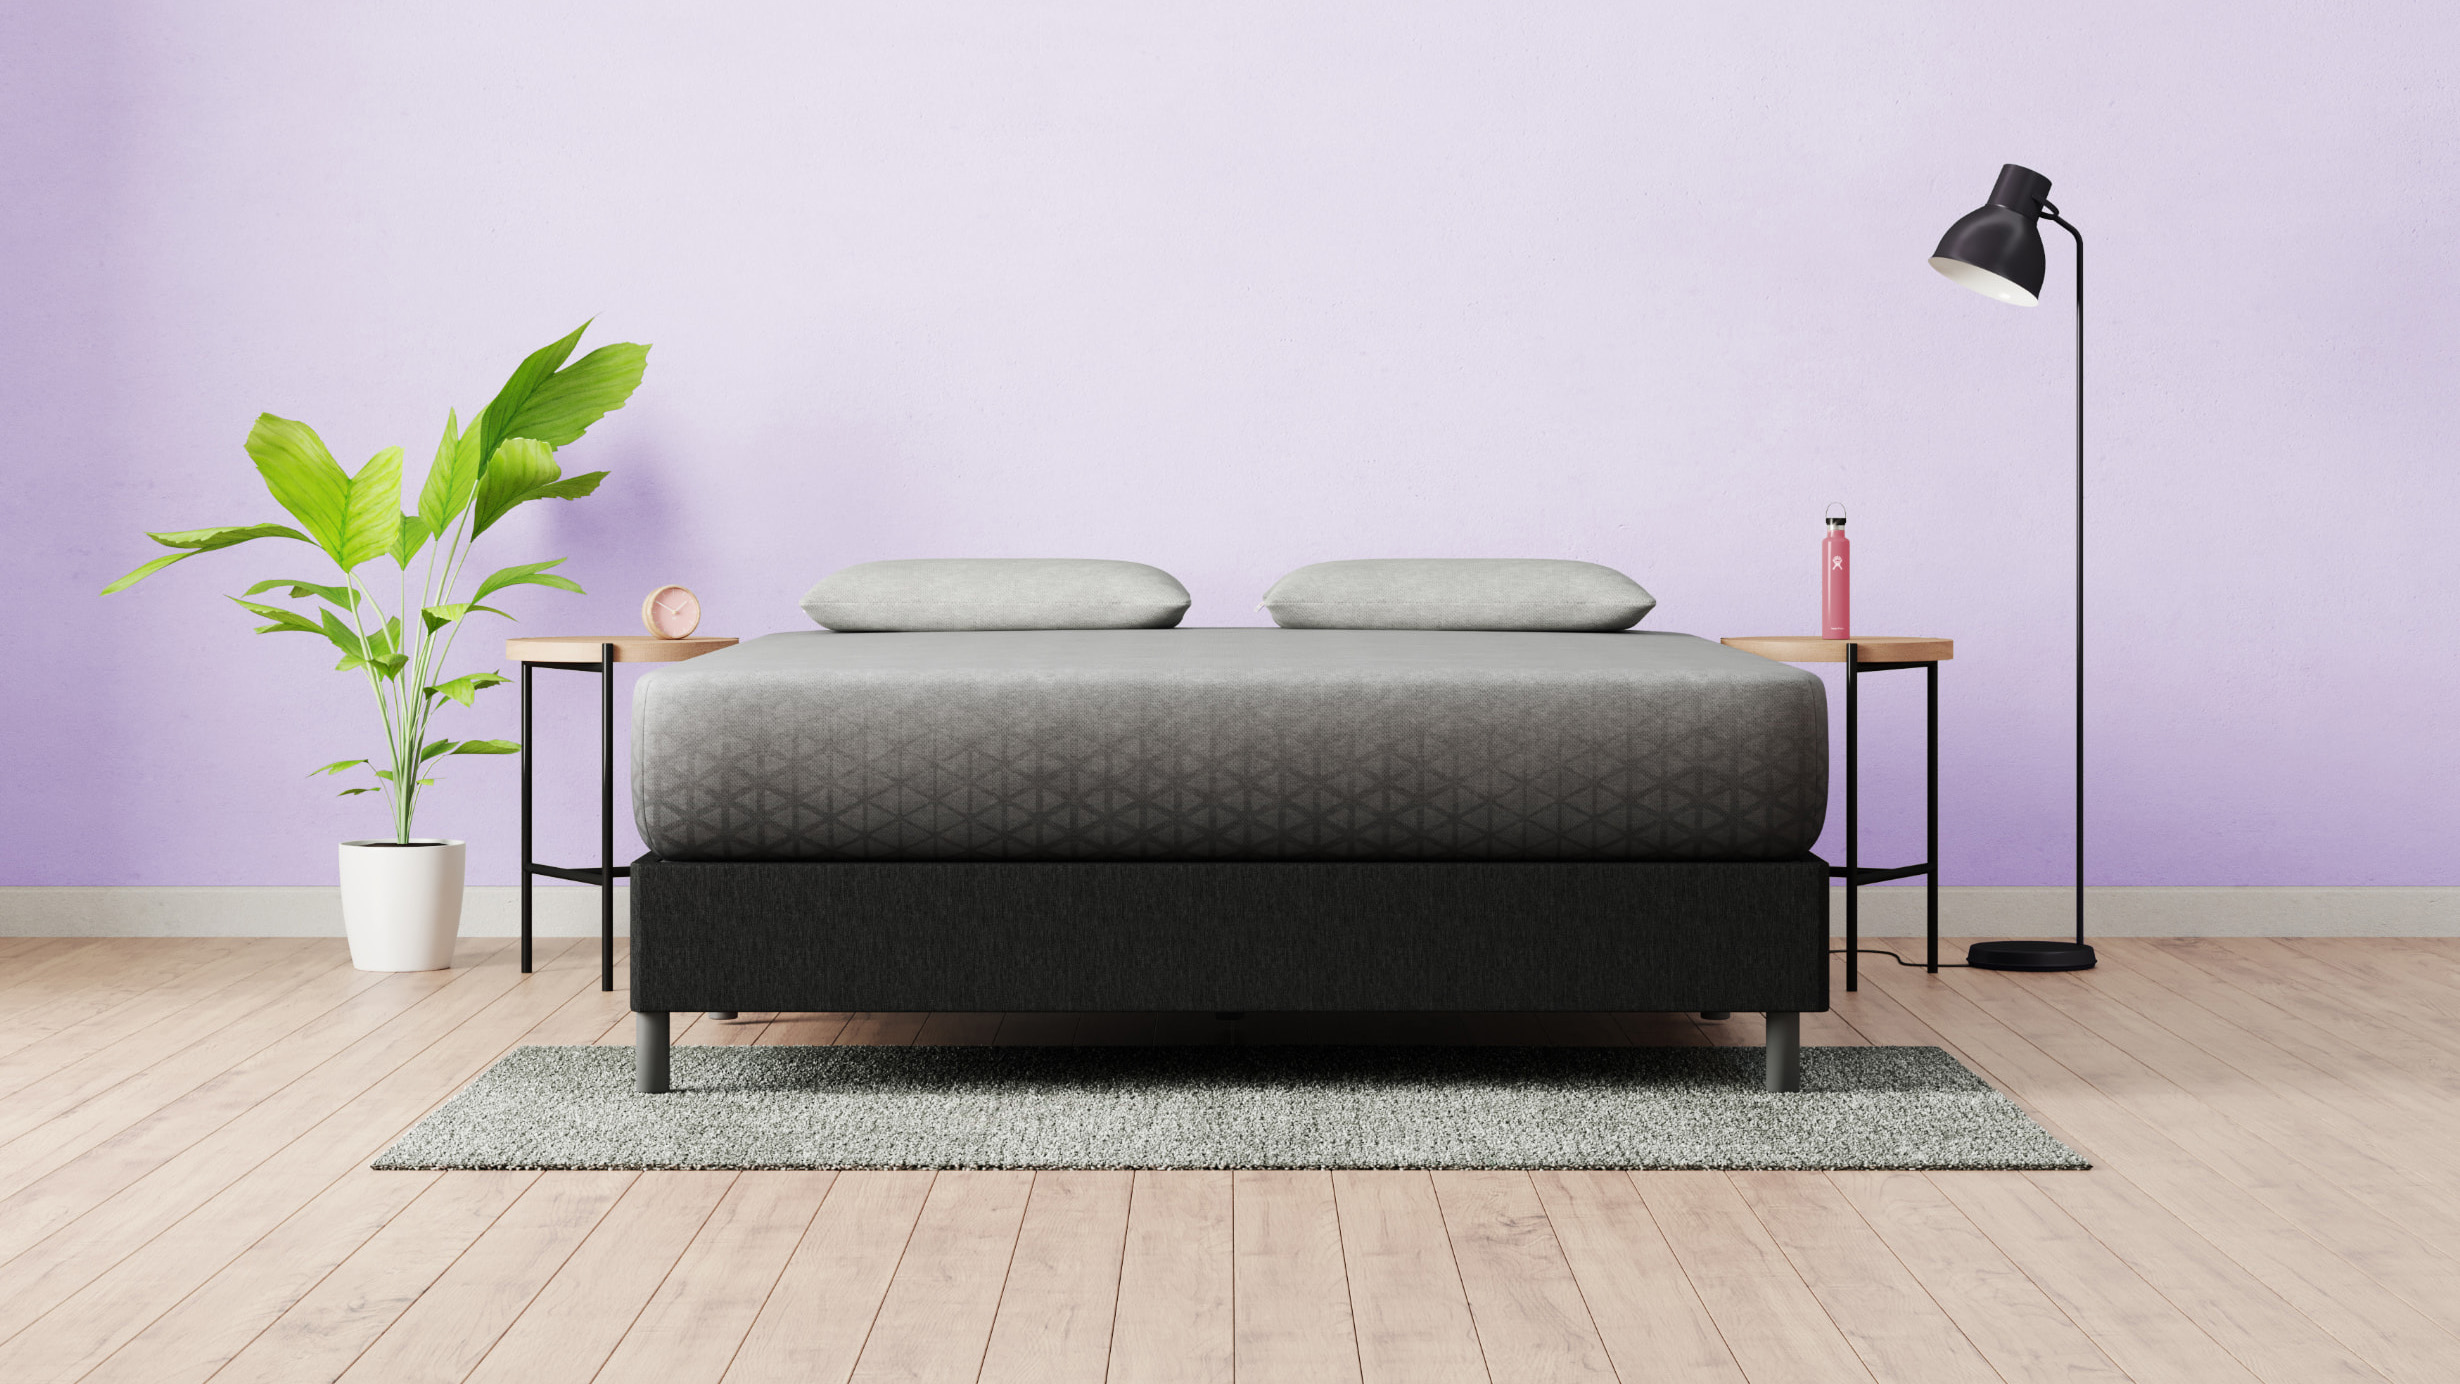 The Zoma Memory Foam Mattress in a purple bedroom with a wooden floor